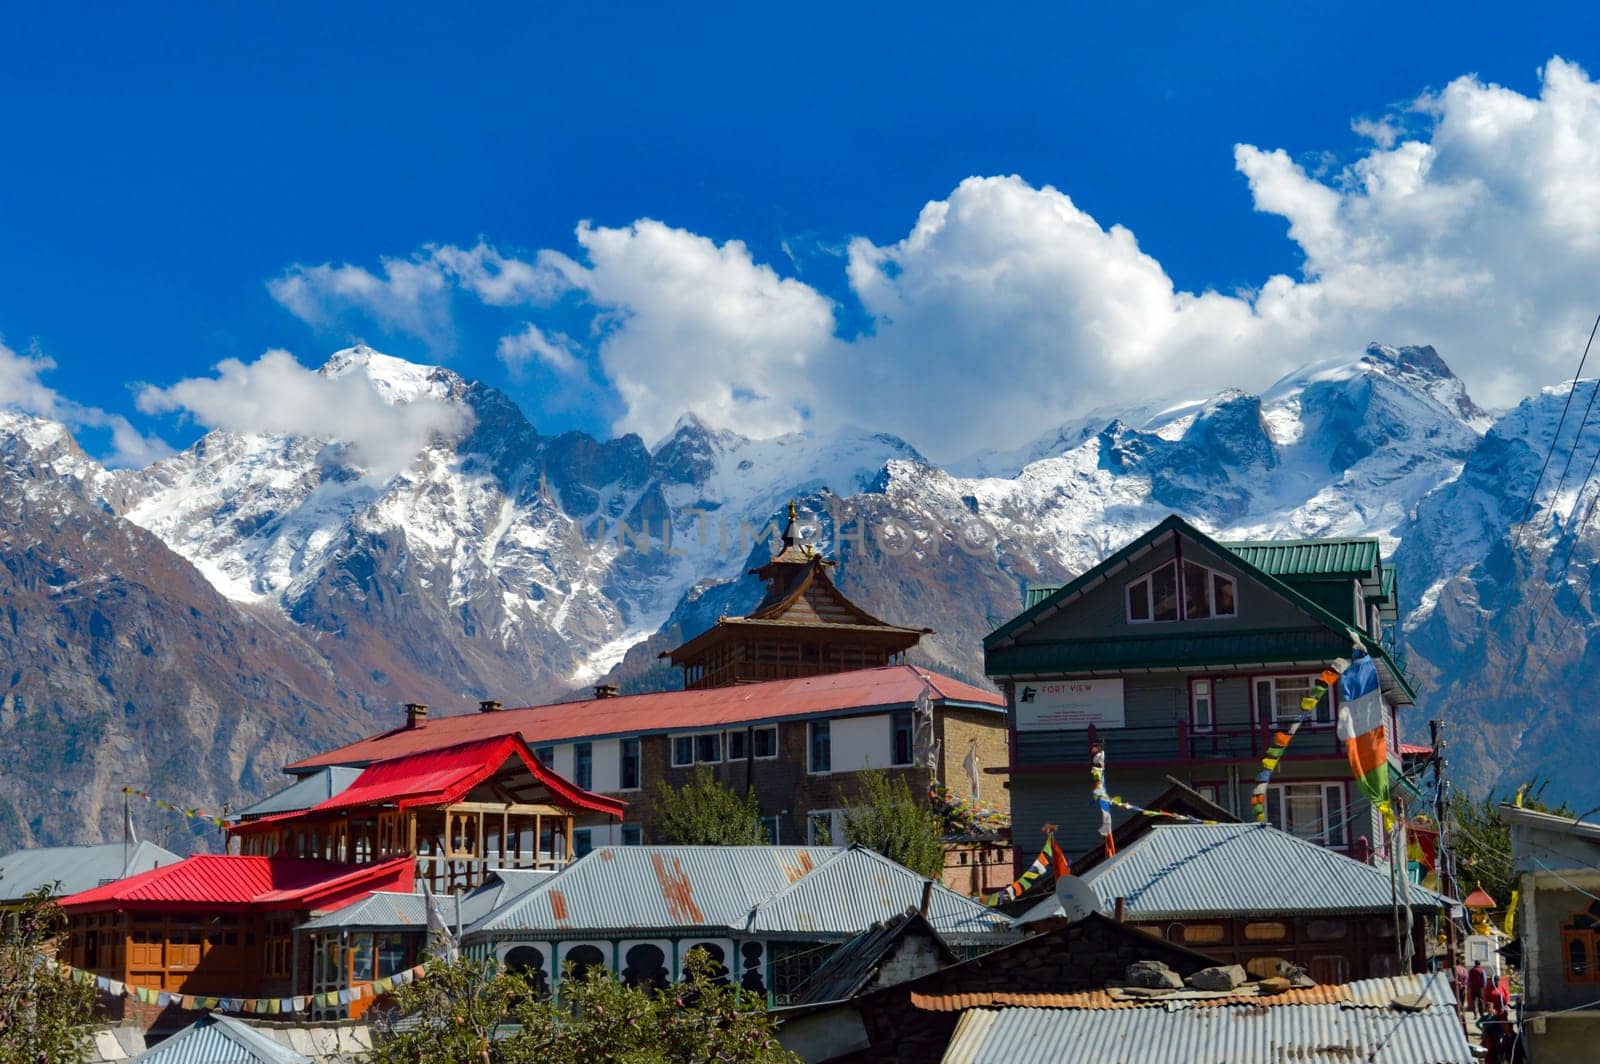 A Buddhist Monastery against show covered mountain with floating clouds in the background. Kaza Himachal Pradesh India South Asia Pacific December 26, 2021